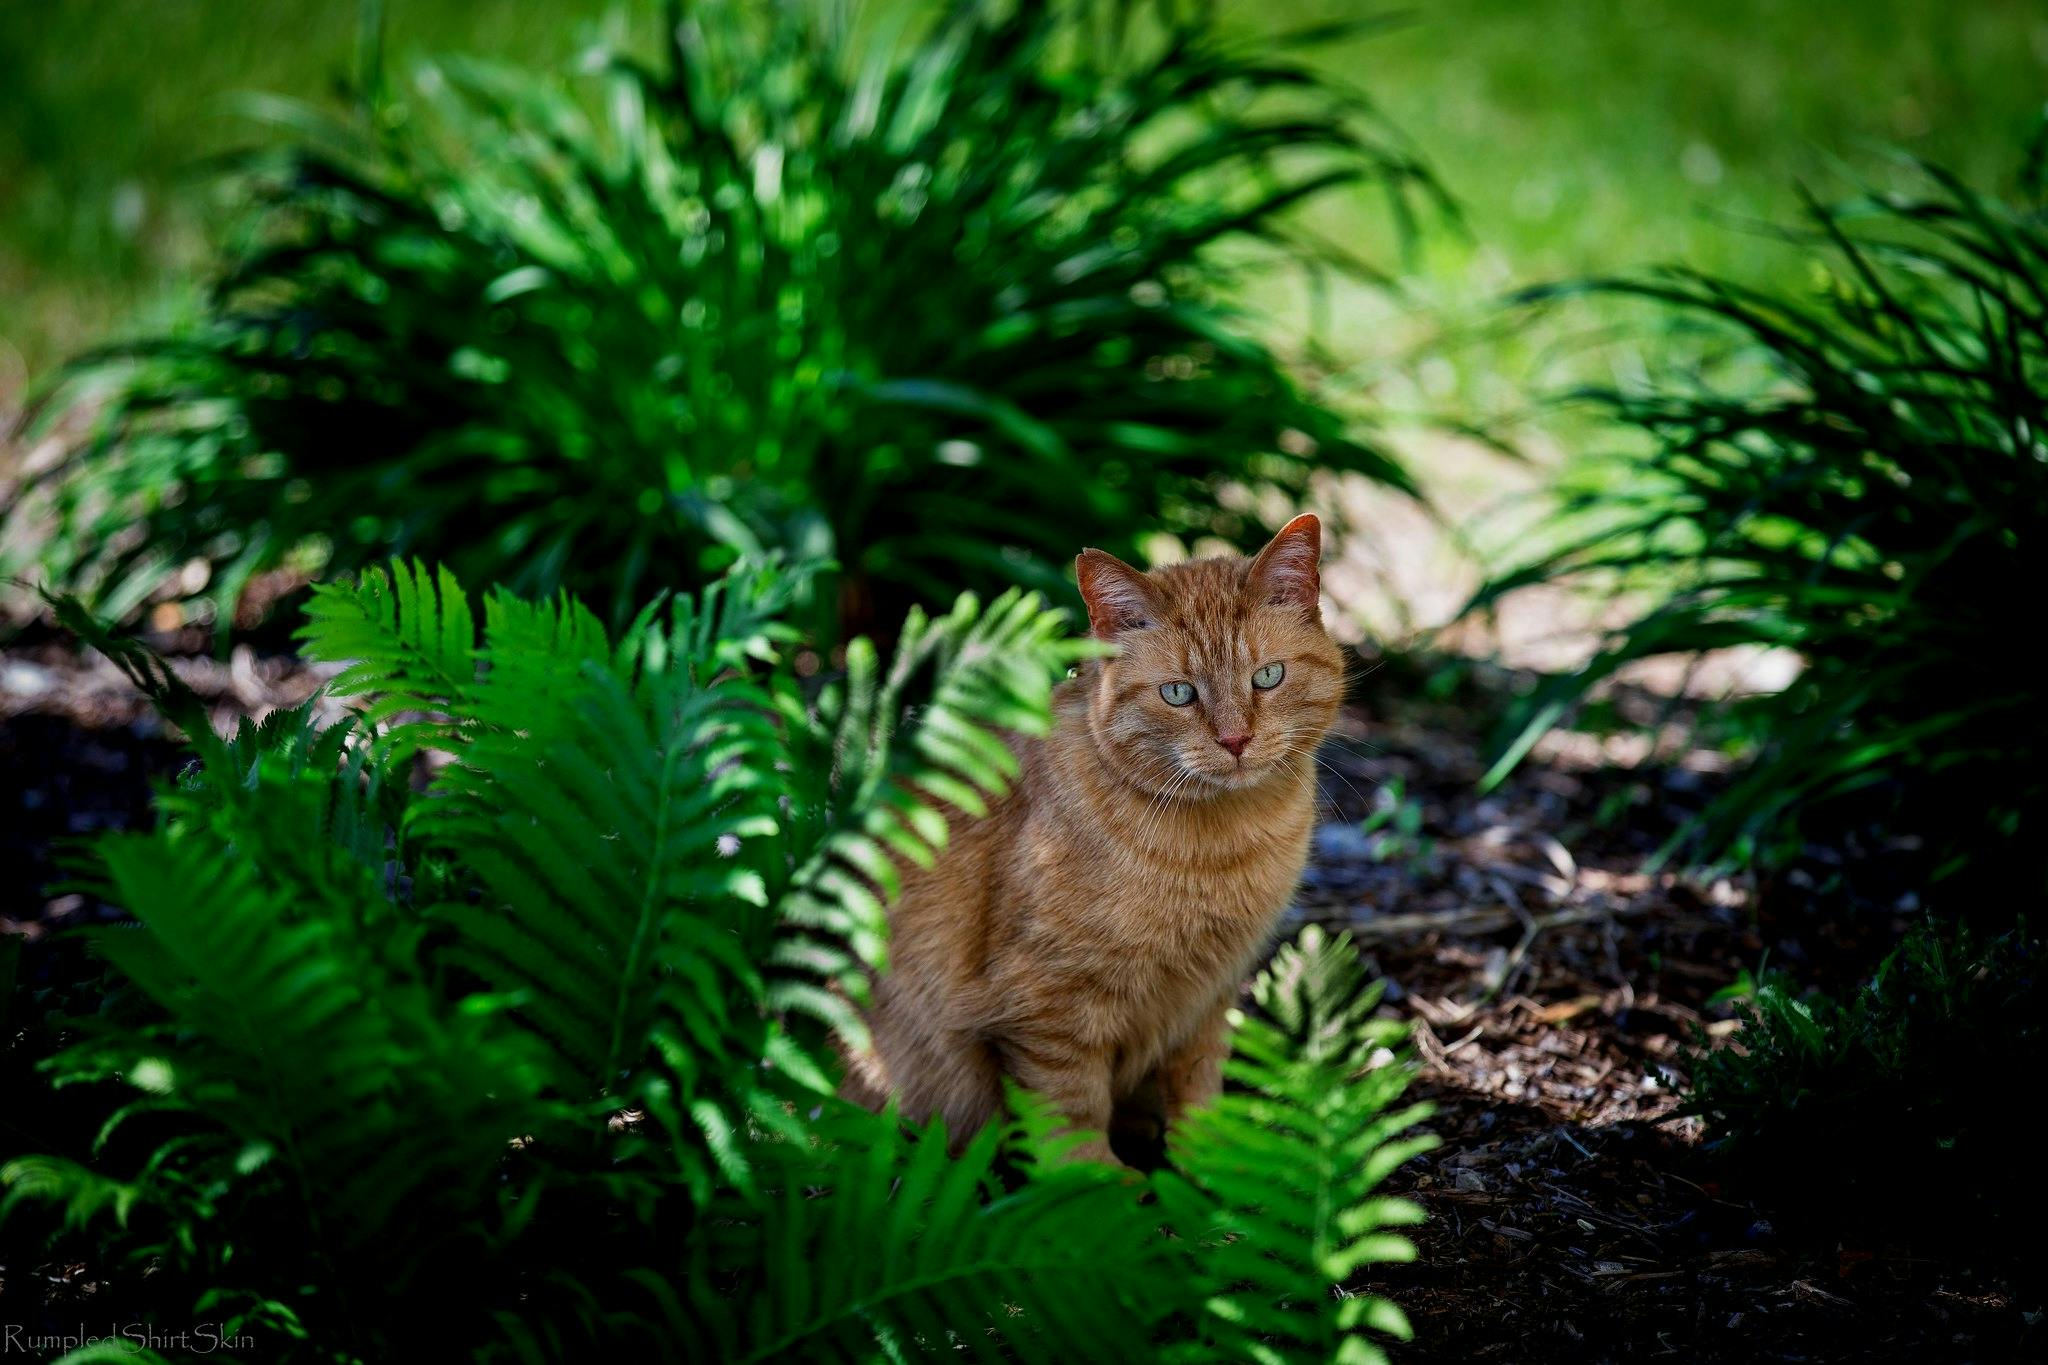 Are Ferns Toxic To Cats? Possible Risks Ferns Pose To Cats